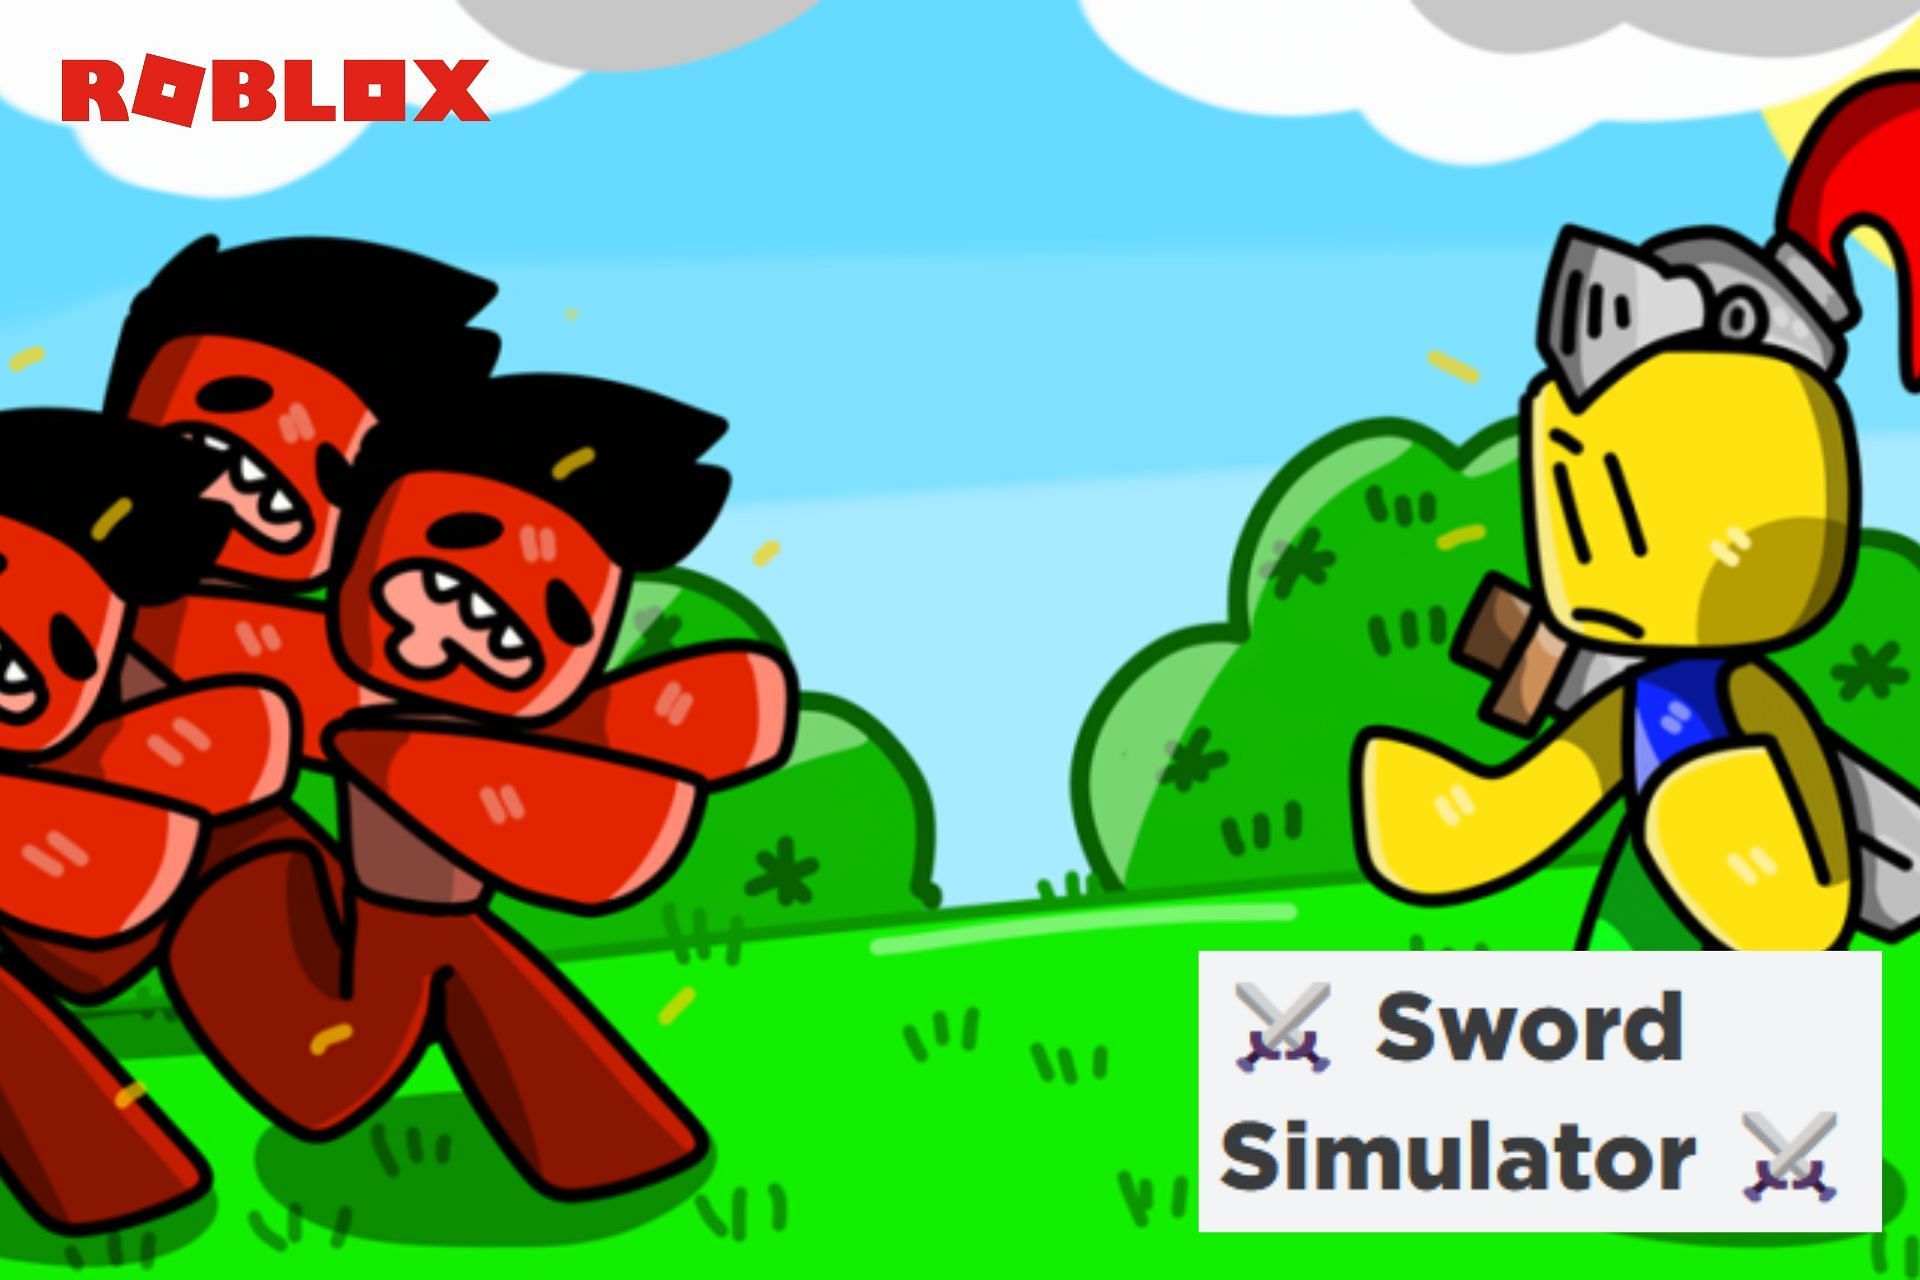 Sword Falling Simulator Codes Wiki [NEW!] - Try Hard Guides